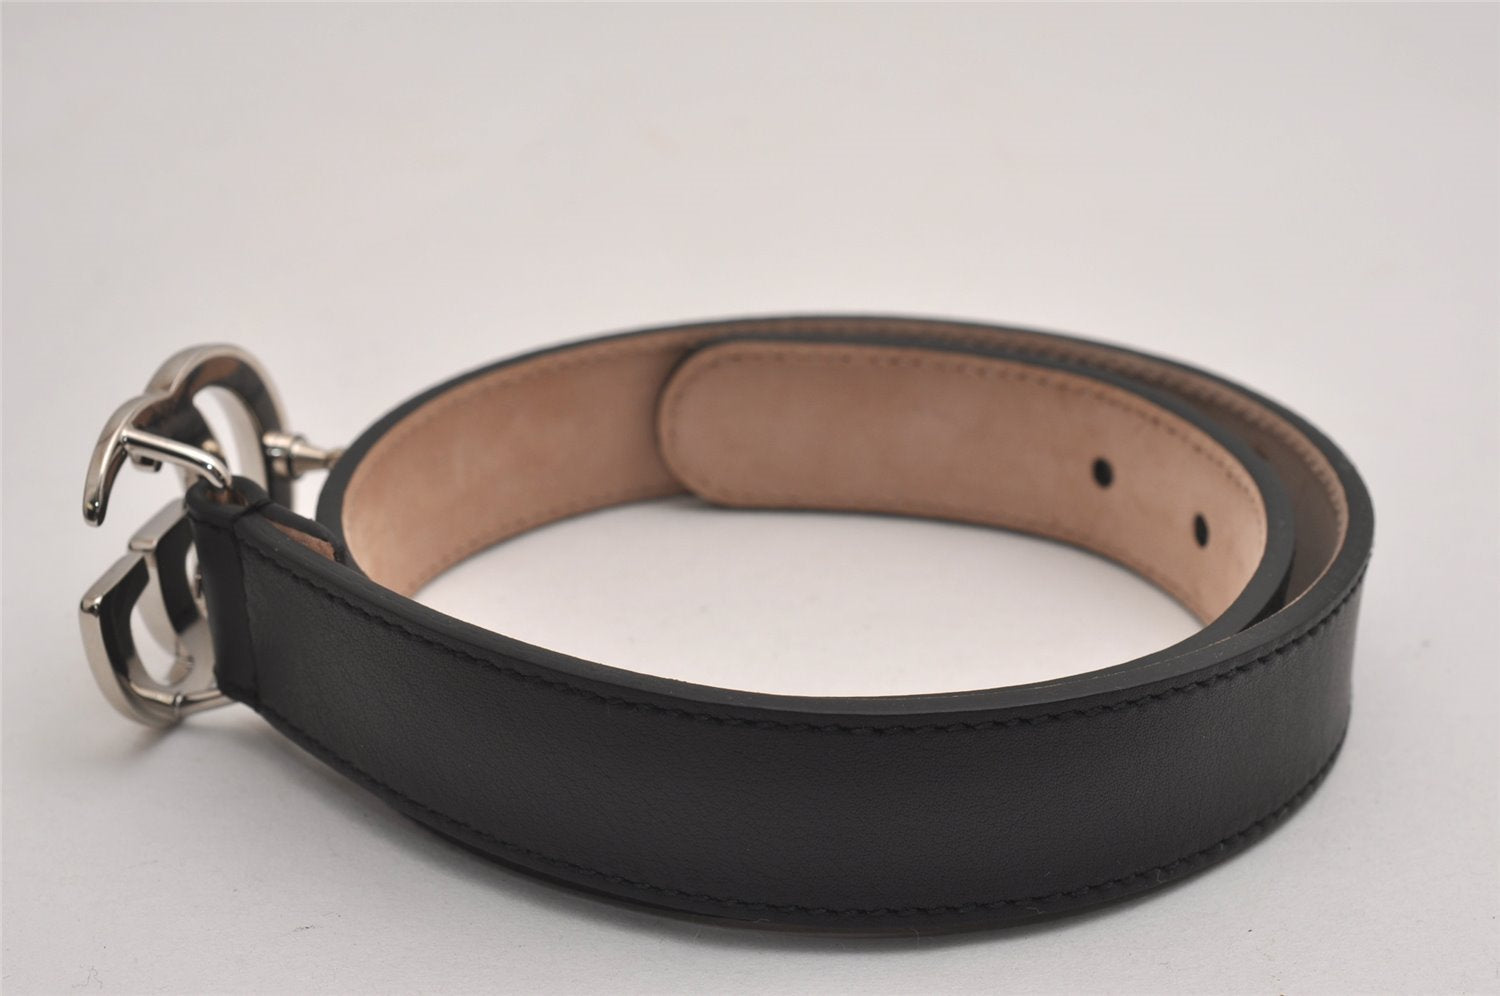 Authentic GUCCI Childrens GG Marmont Leather Belt Black 20.1-23.2